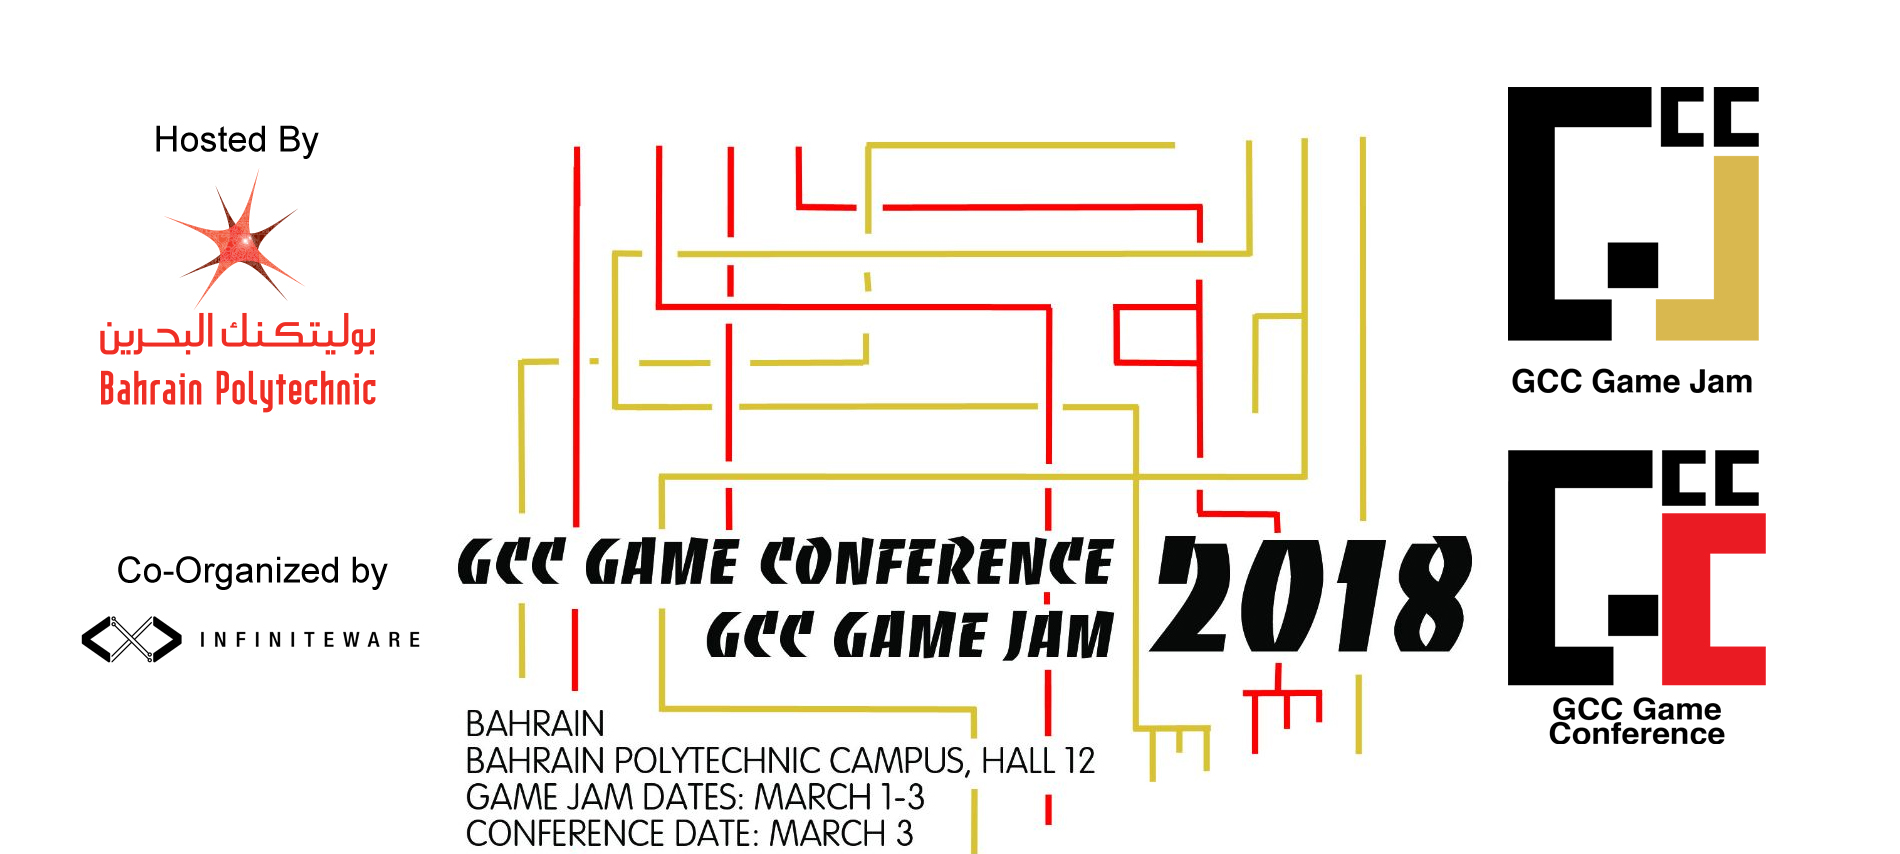 Signup for the GCC Game Jam 2018